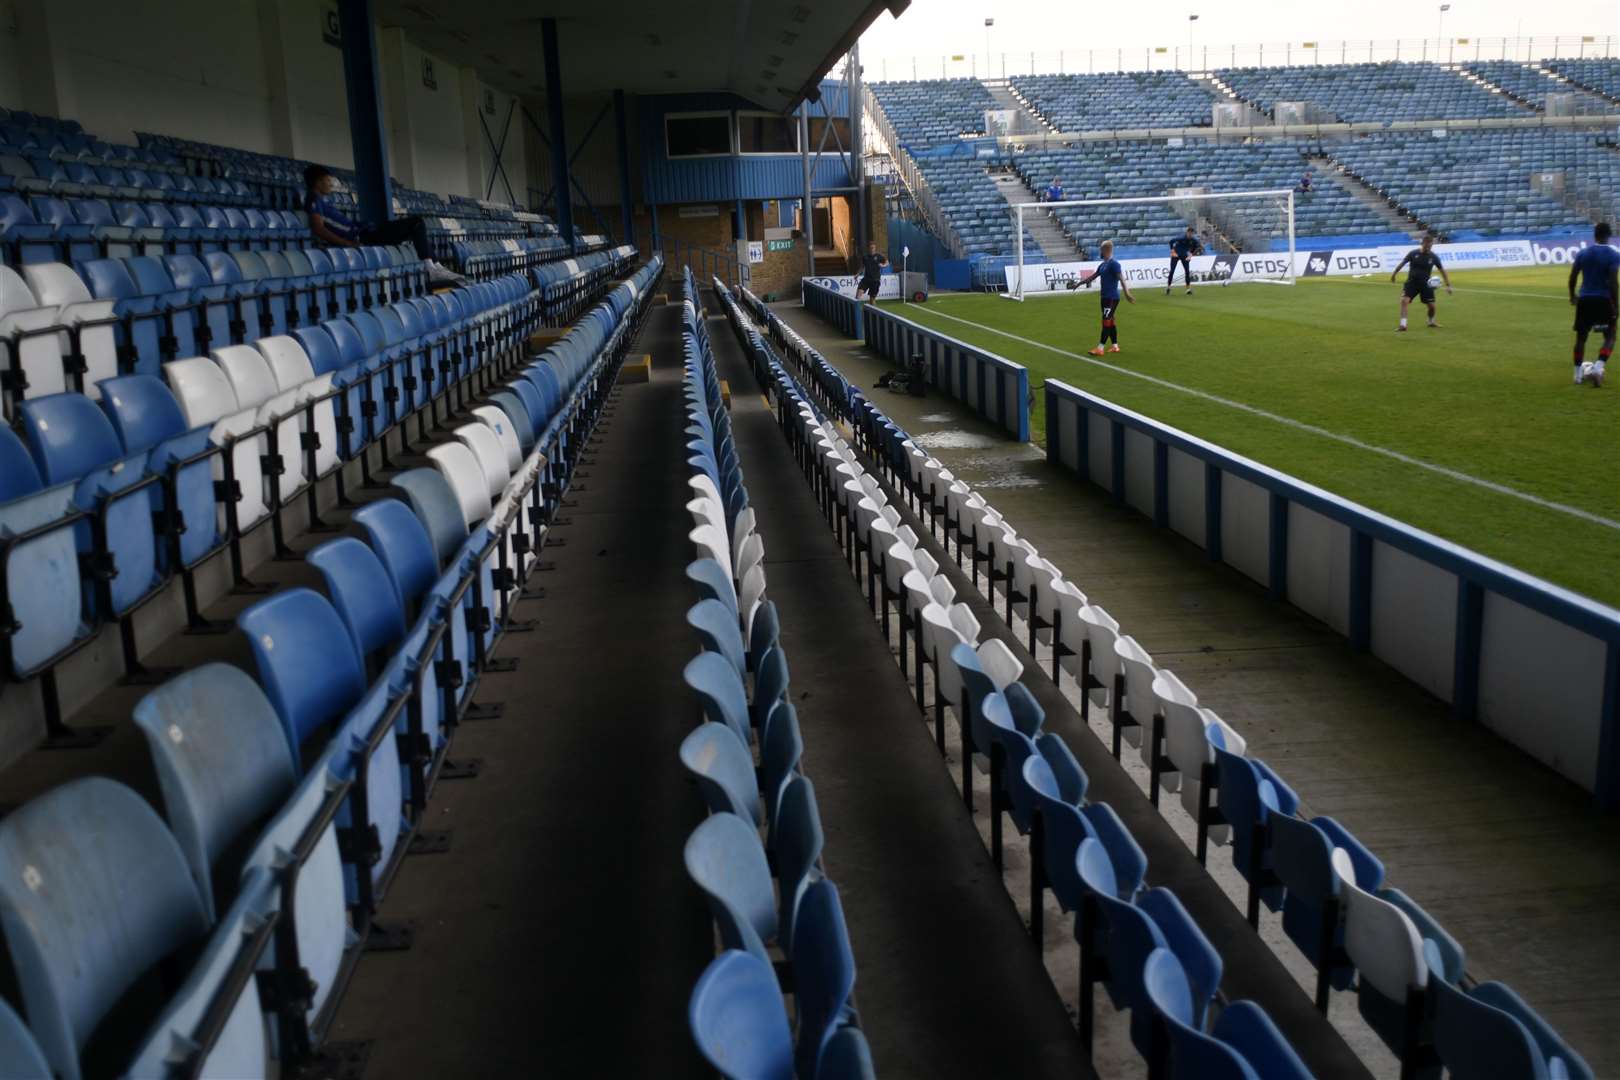 Empty stands due to the Covid pandemic during the 2020/21 season